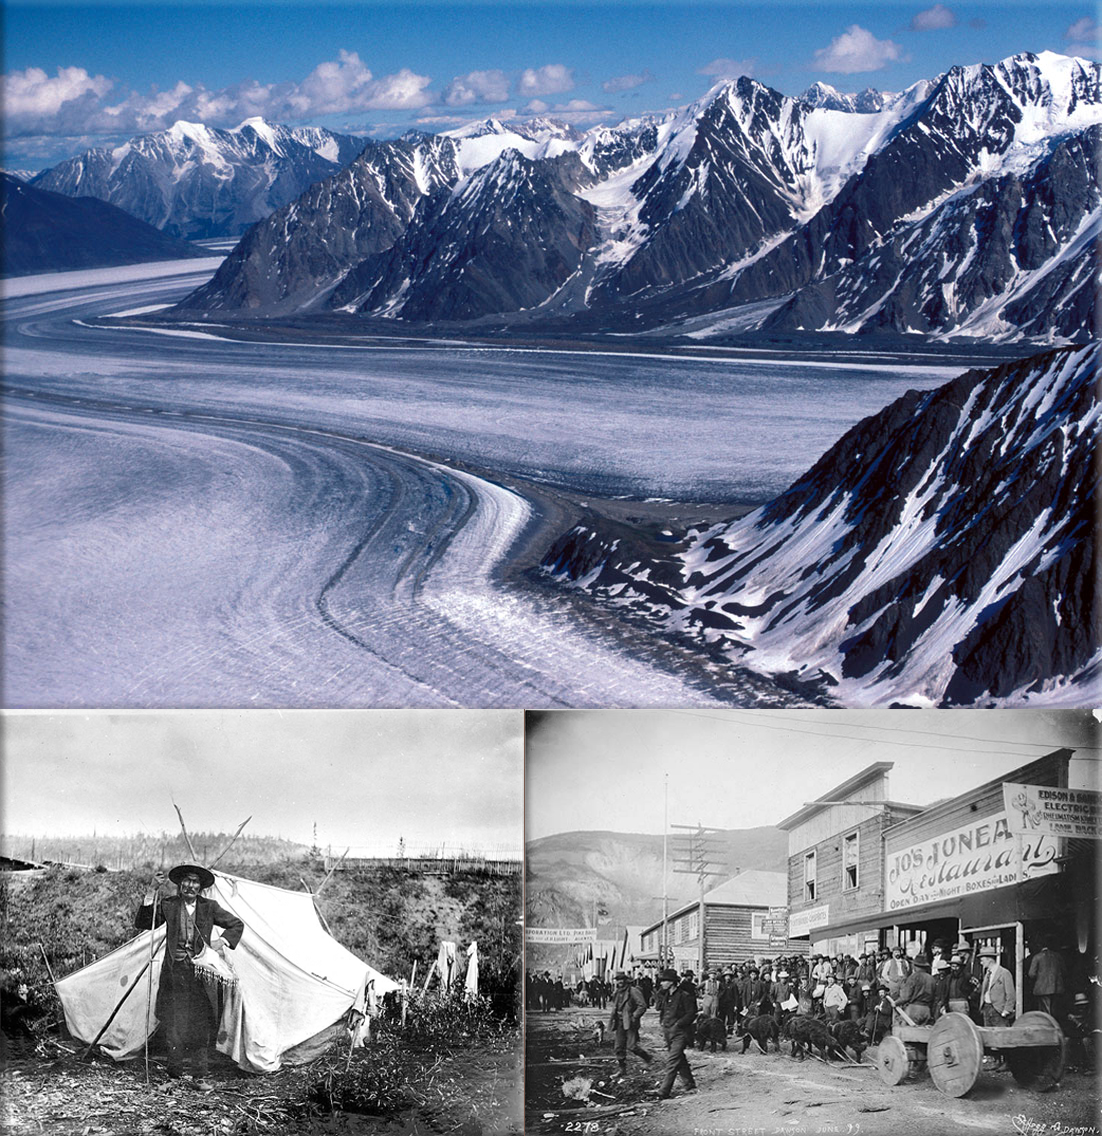 Yukon Territory is formed, with Dawson chosen as its capital on June 13th, 1898